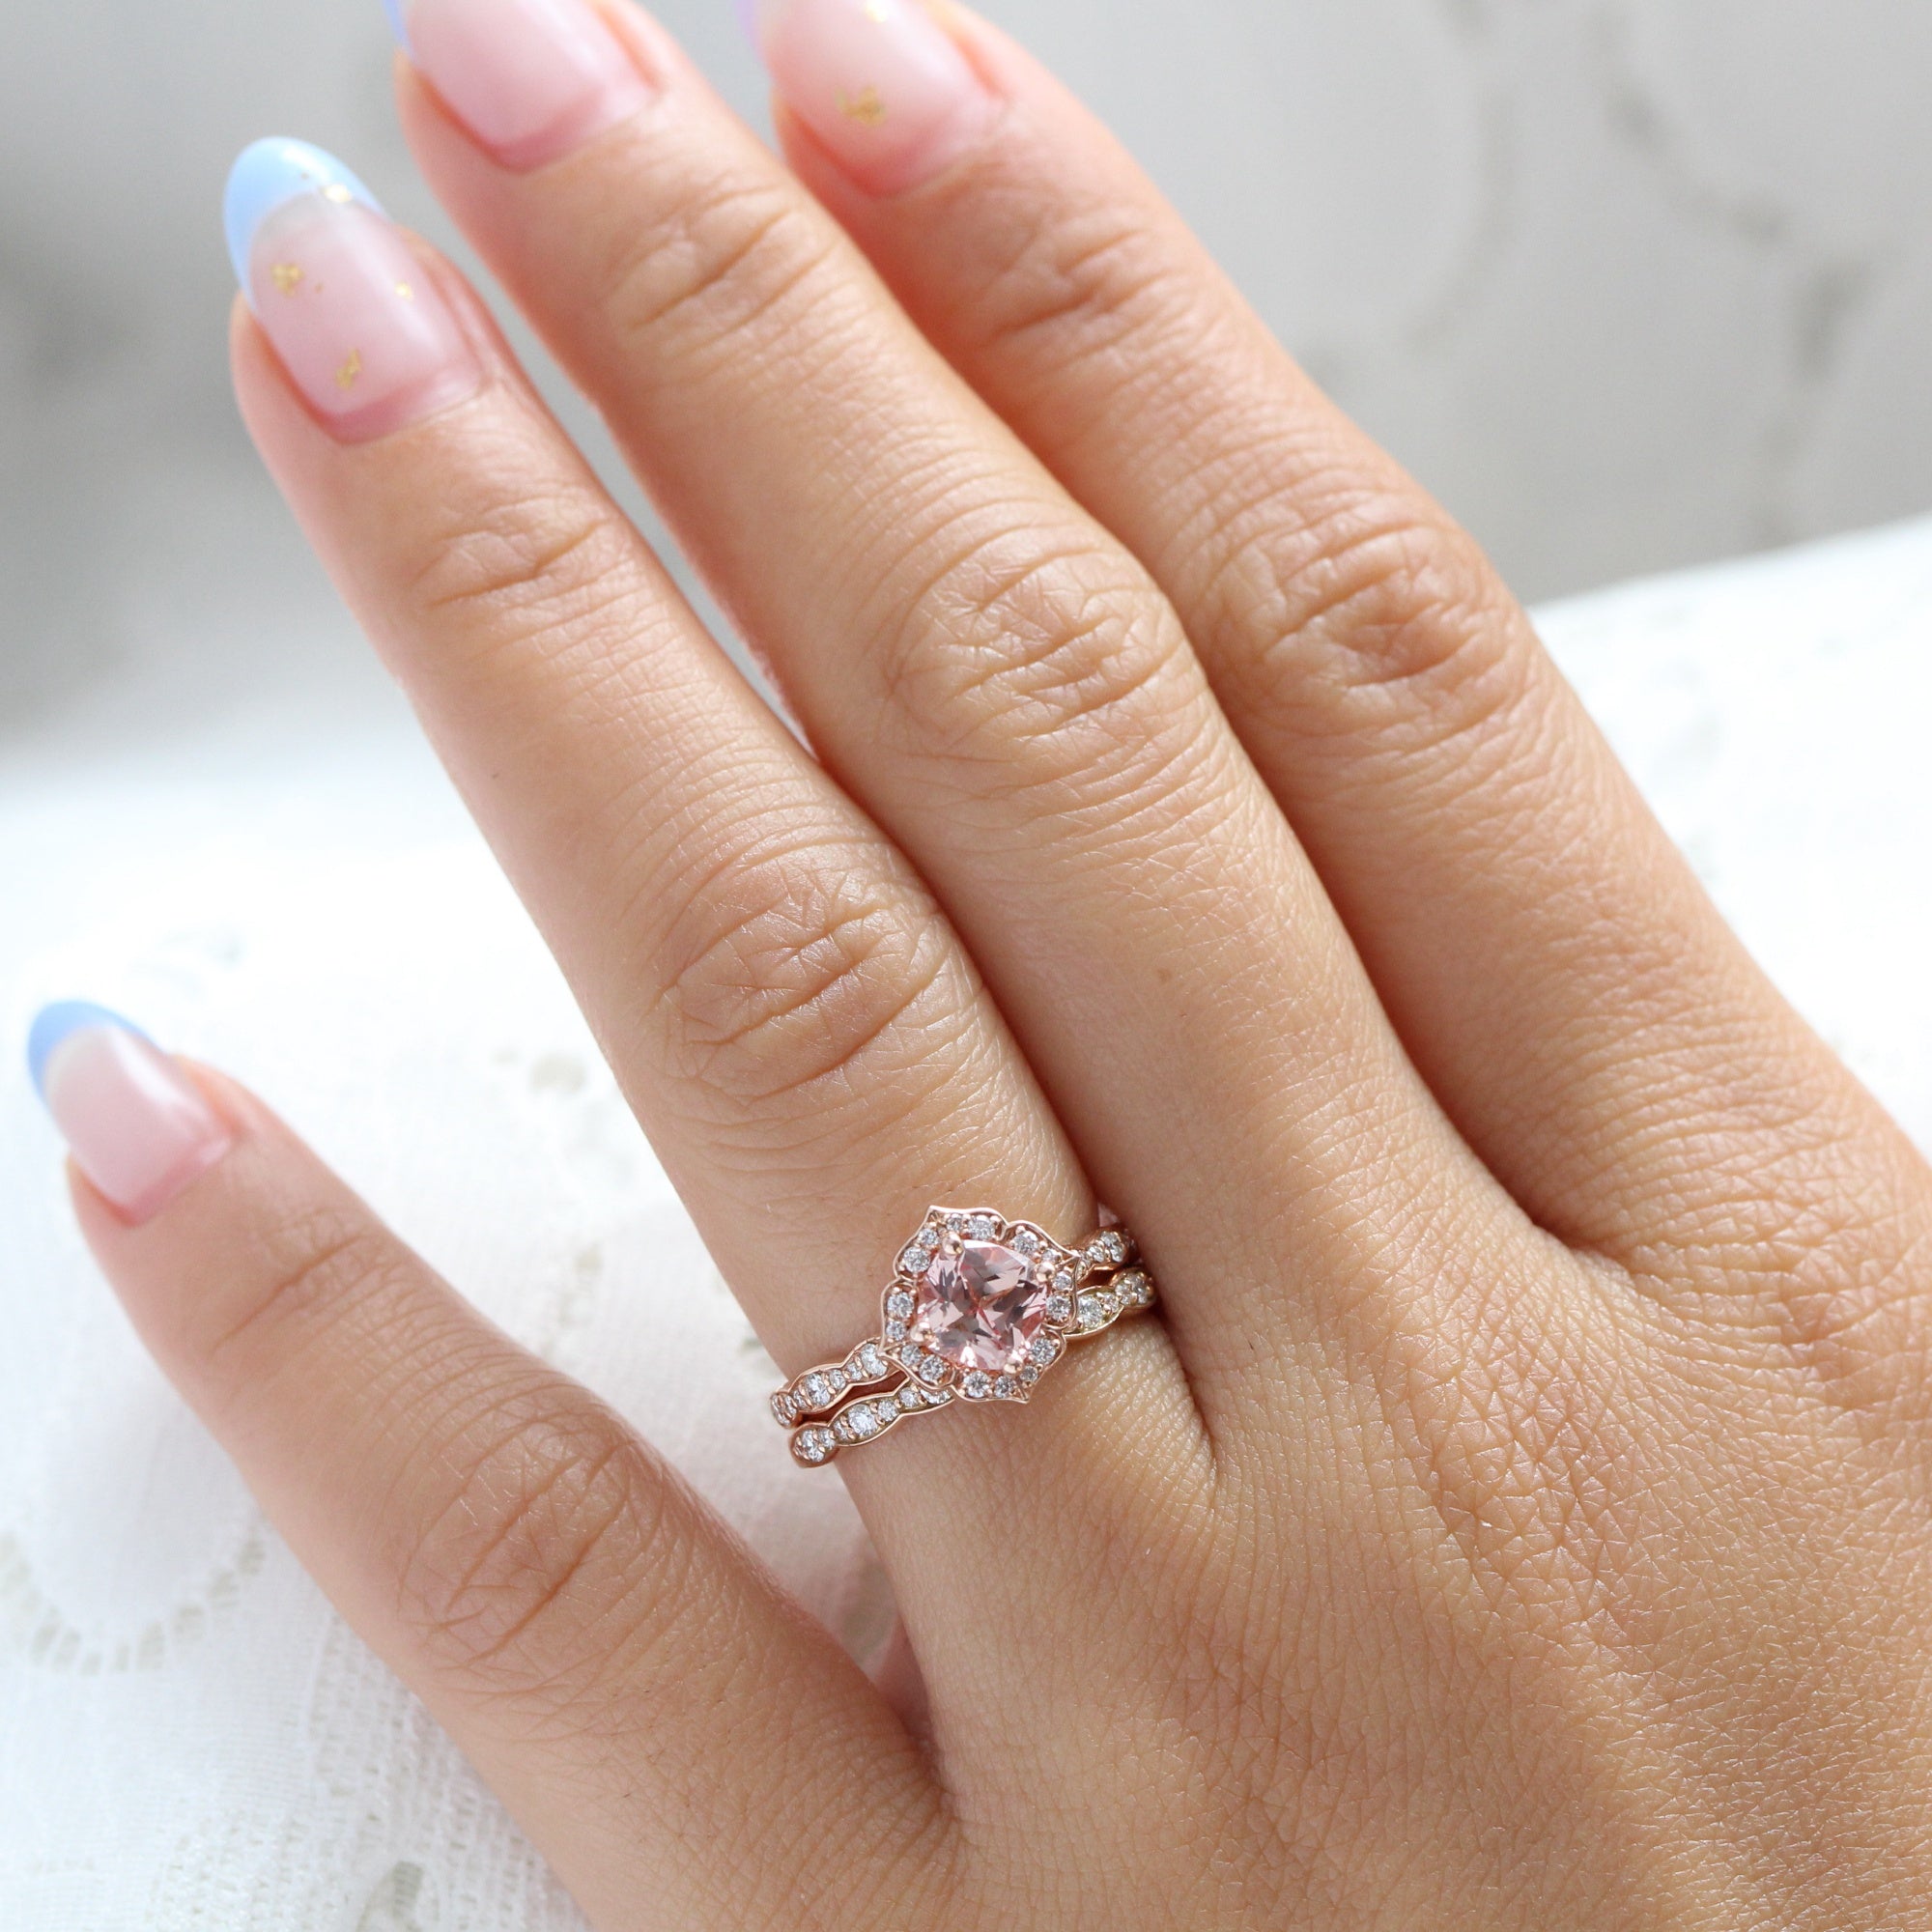 Cushion peach sapphire engagement ring stack rose gold vintage halo diamond sapphire ring la more design jewelry